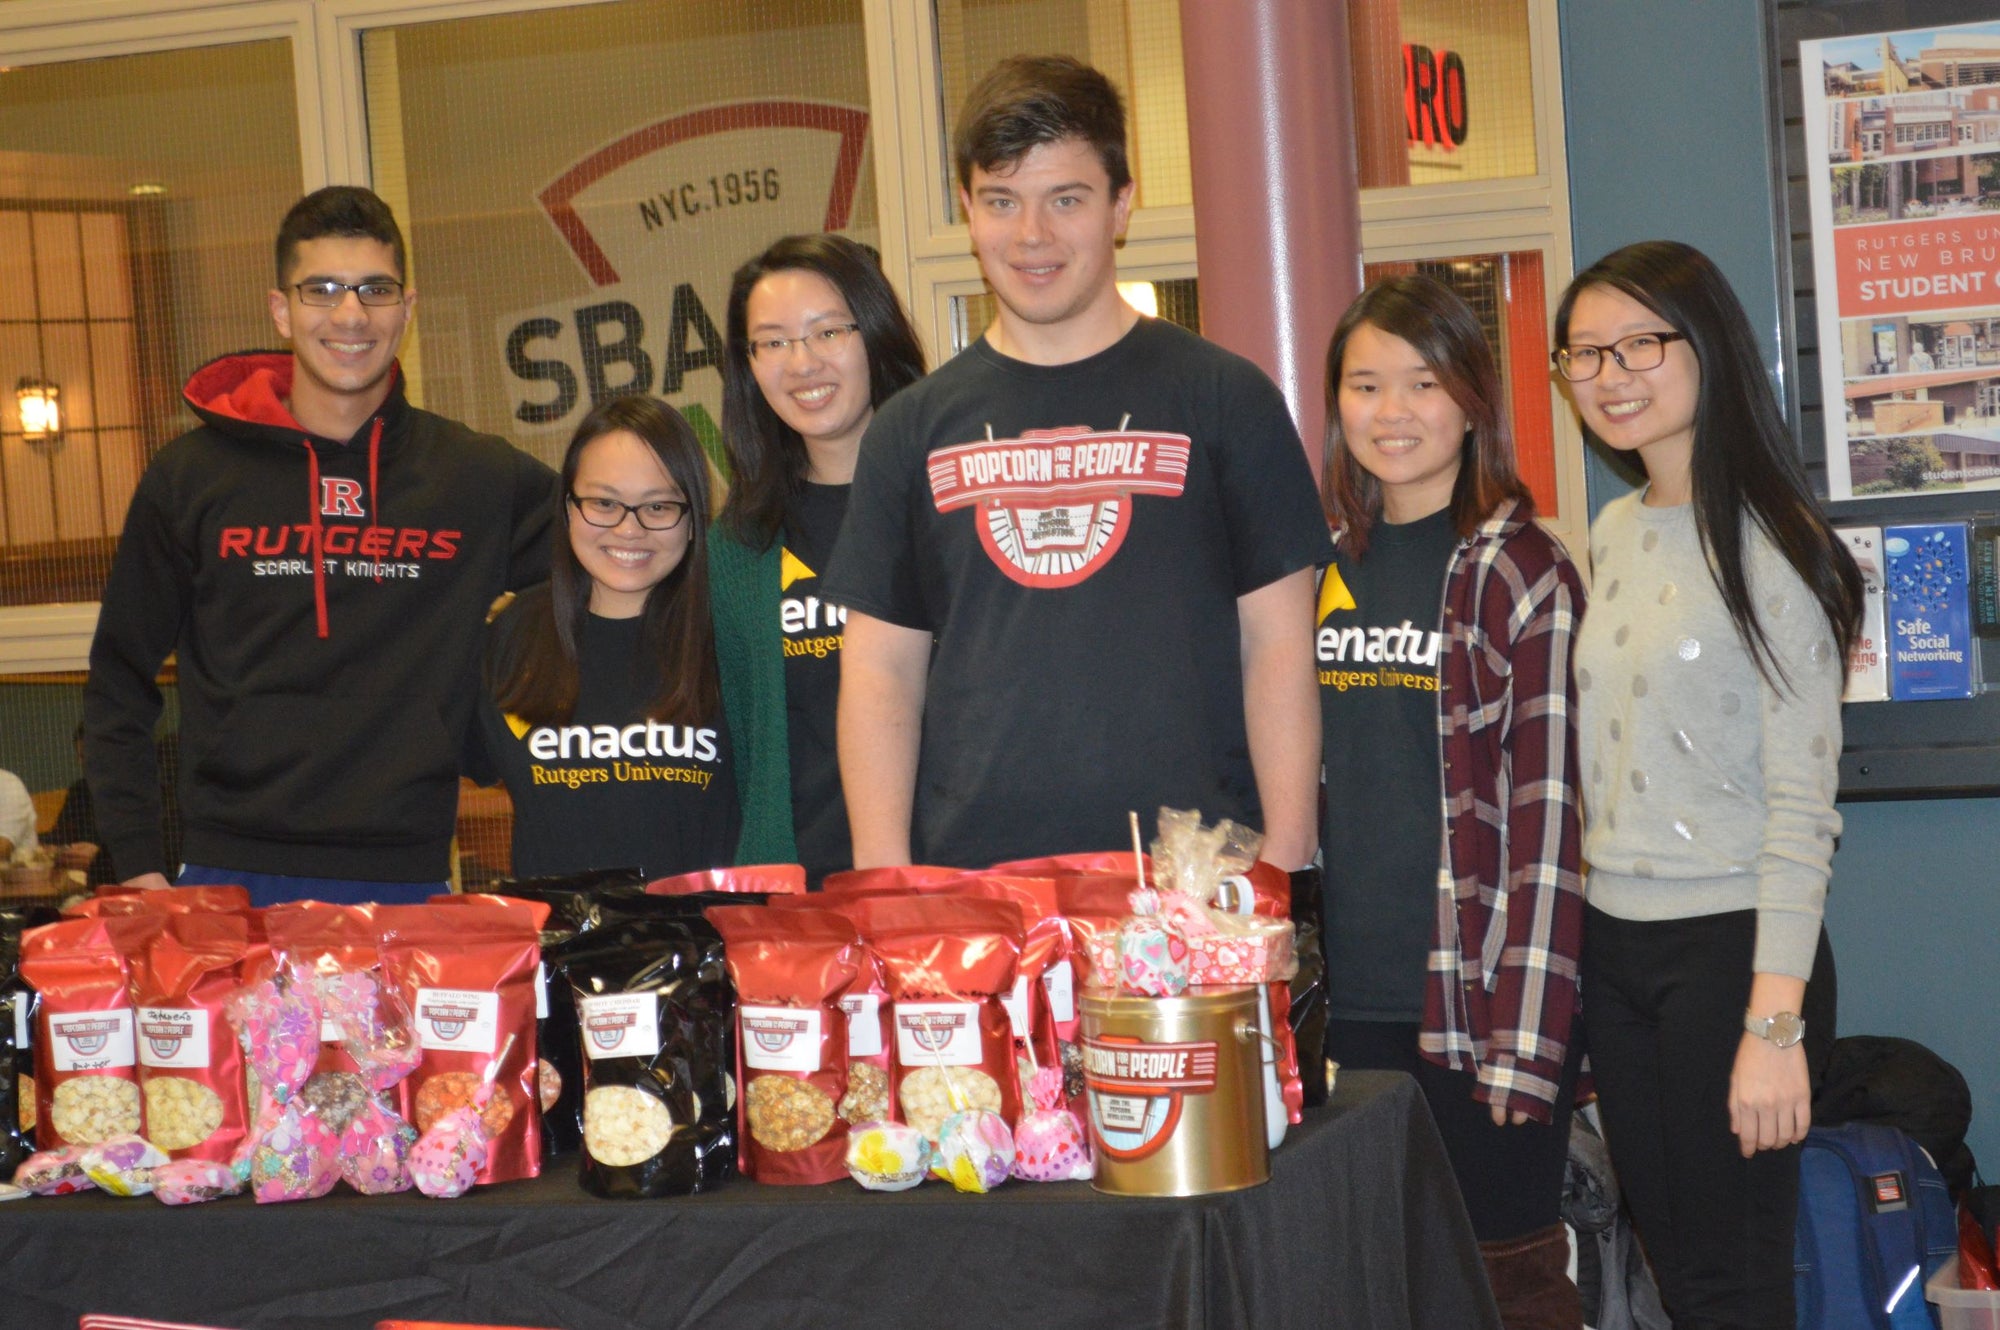 Popcorn for the People partners with Rutgers Enactus to create sustainable autism employment